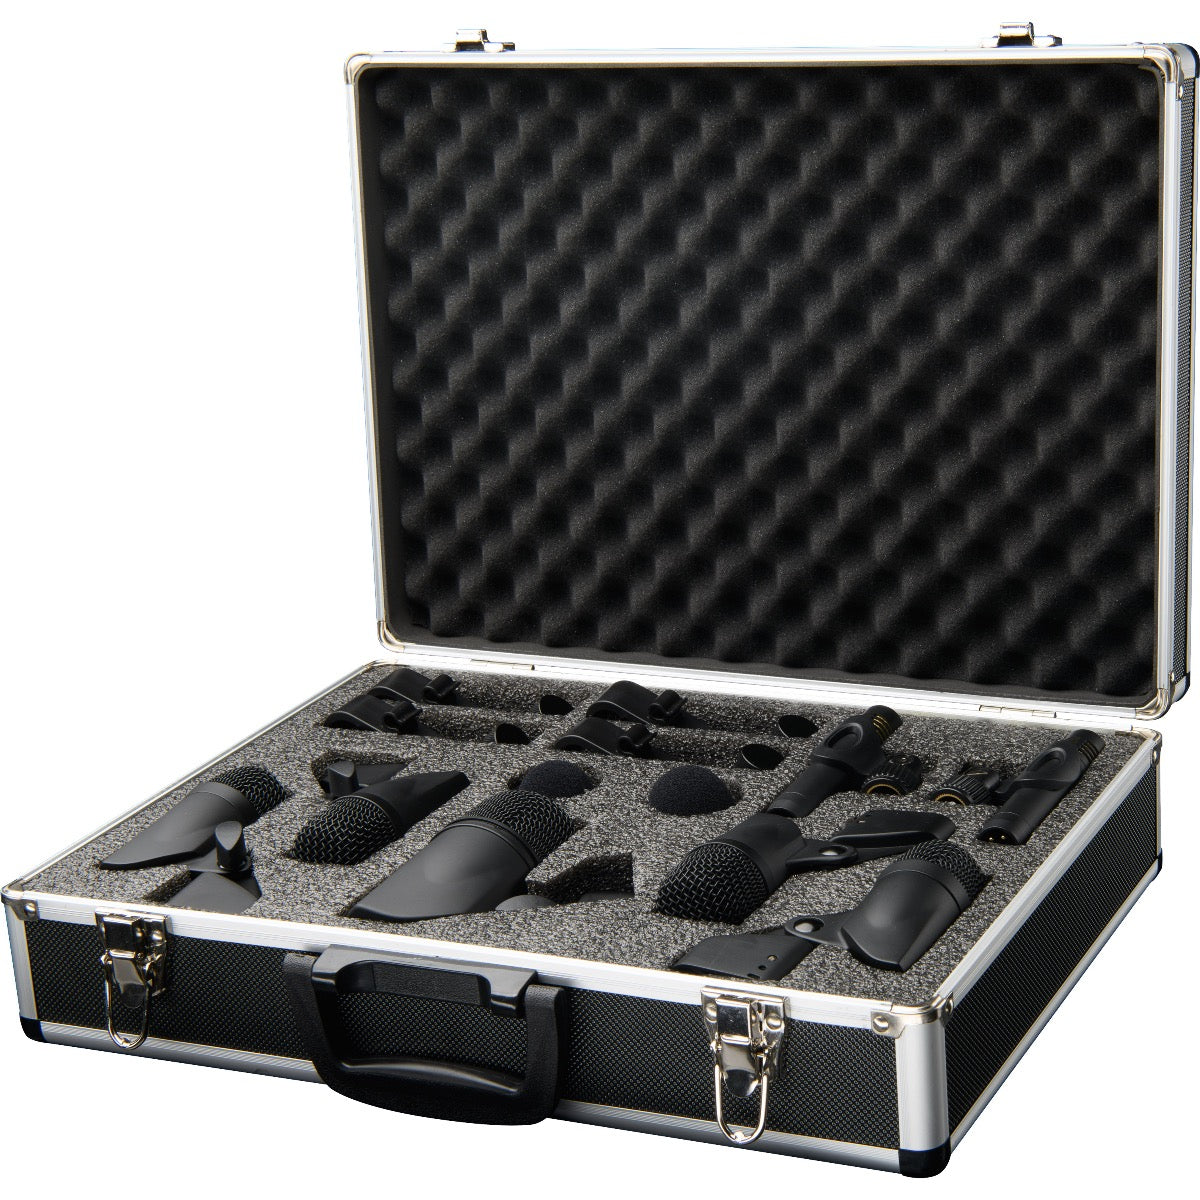 3/4 view of PreSonus DM-7 Drum Microphone Set in carrying case showing top, front and right side